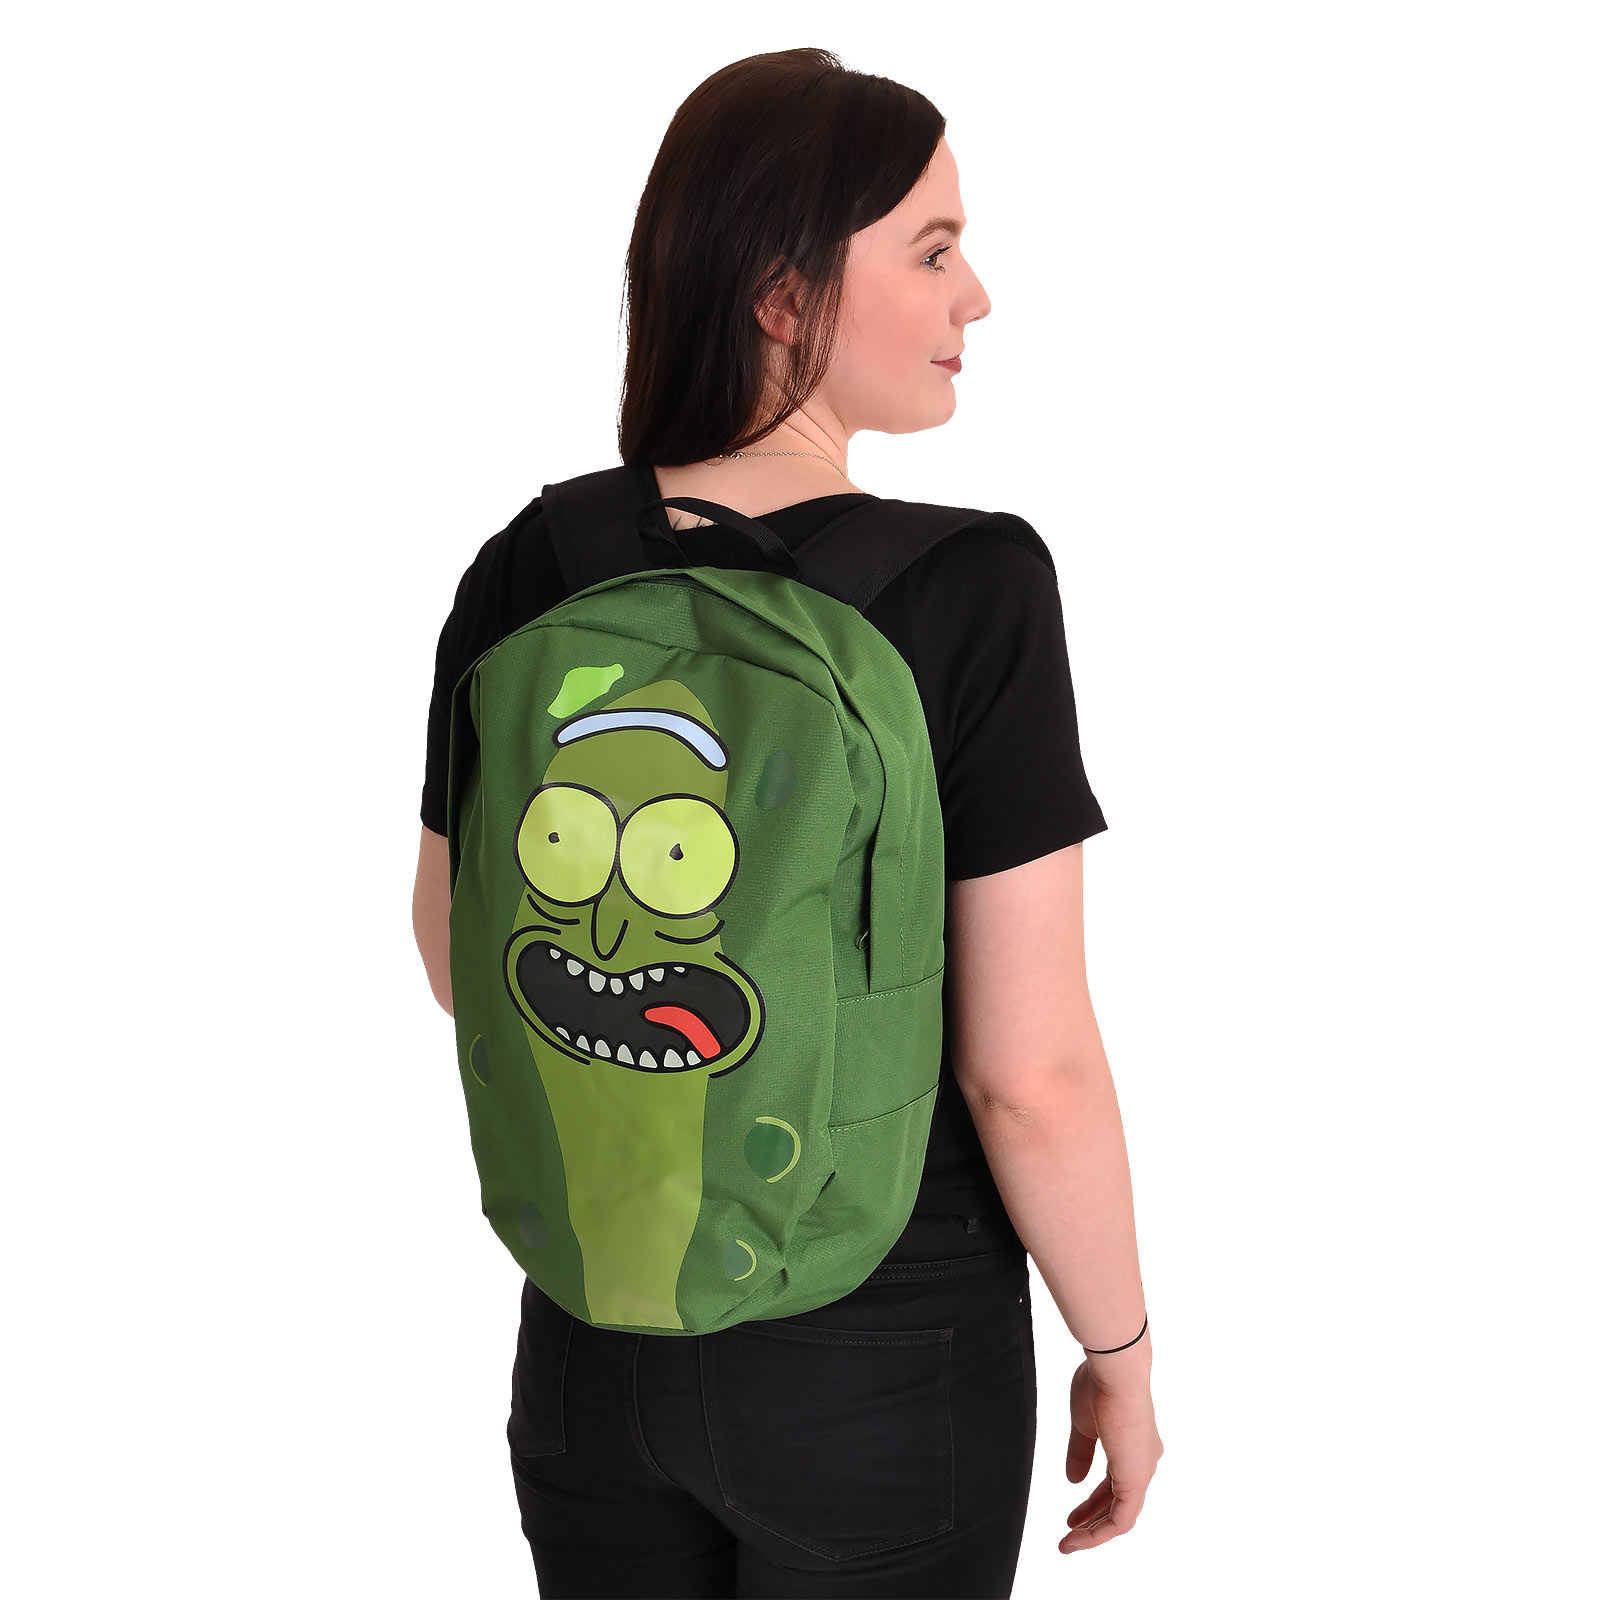 Rick and Morty - Pickle Rick Backpack Green